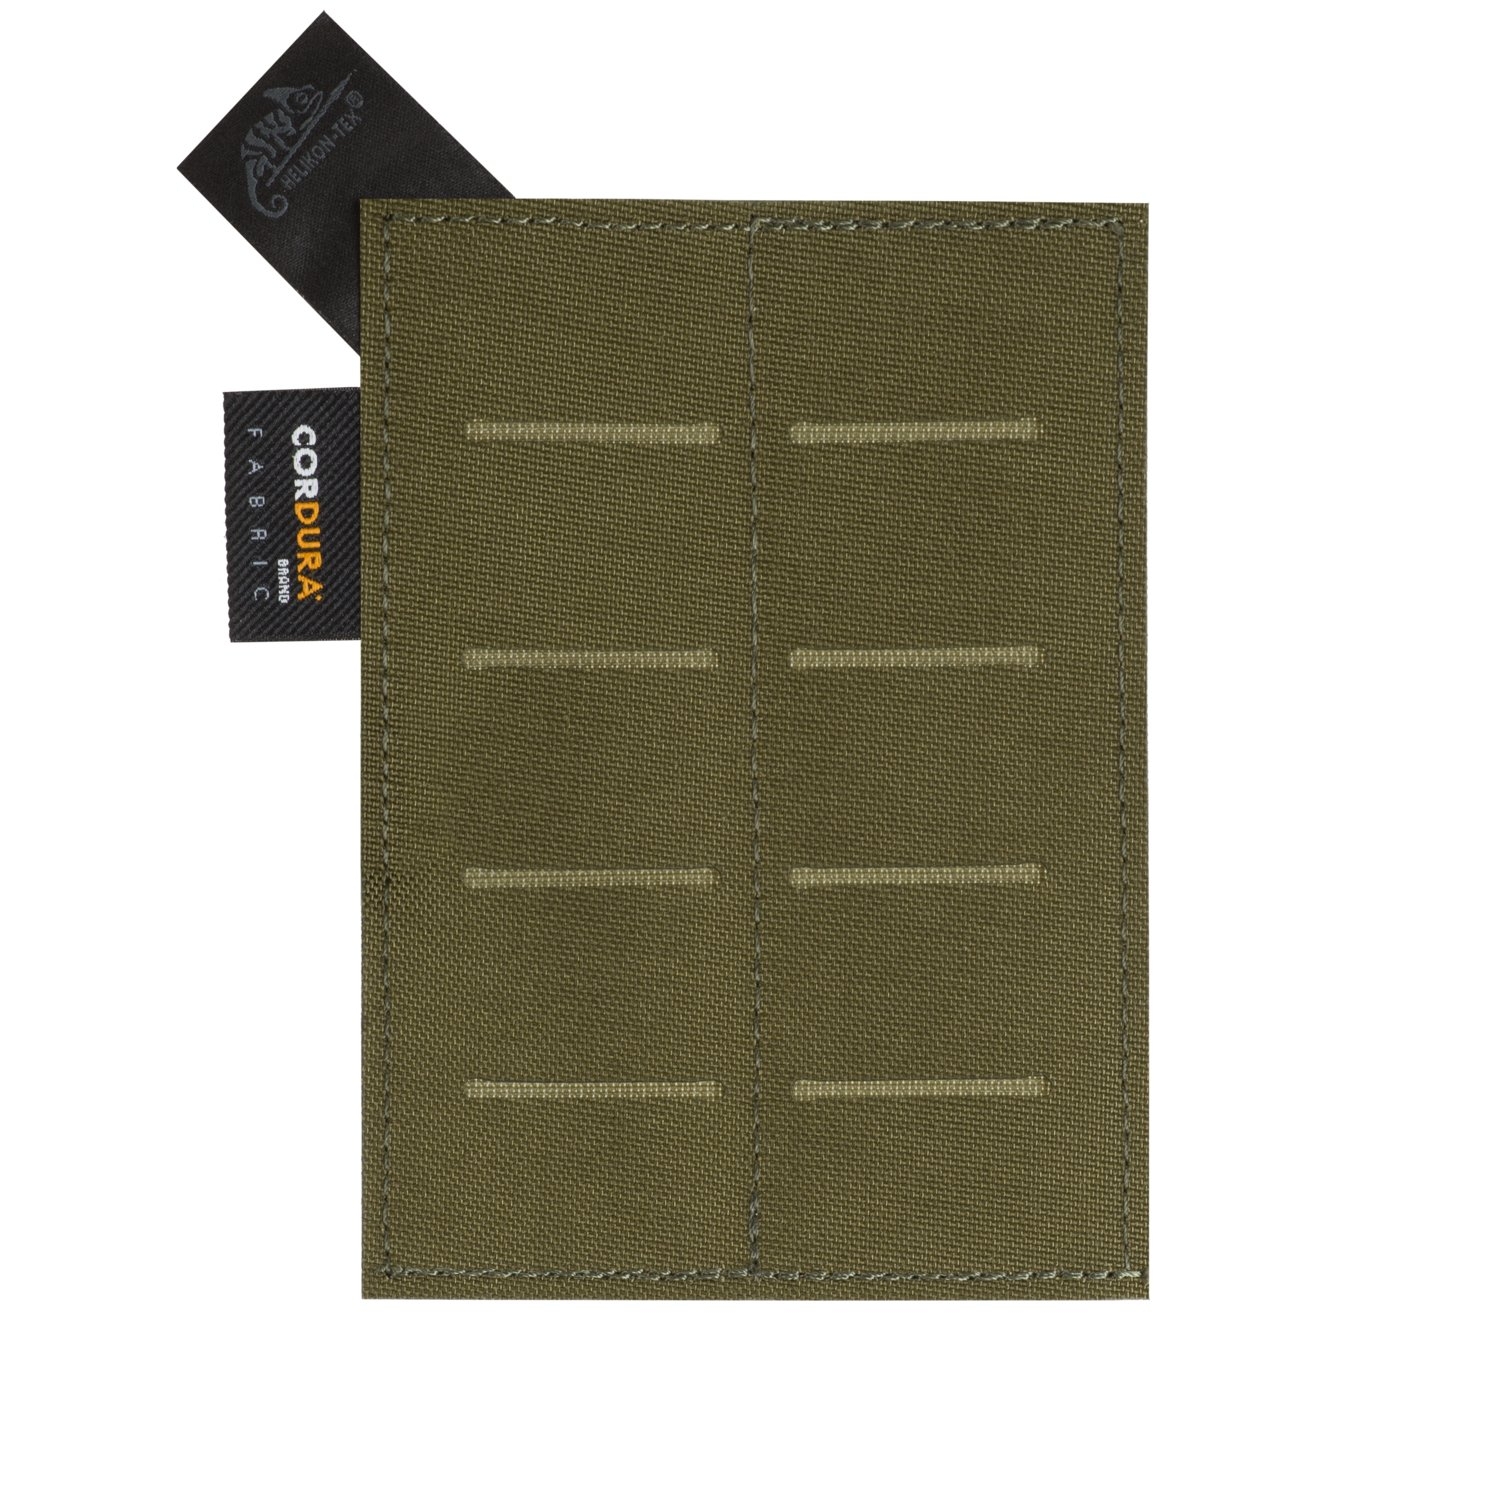 Image of Insert HELIKON MOLLE ADAPTER INSERT 2 - Cordura - Olive Green - One Size (IN-MA2-CD-02)